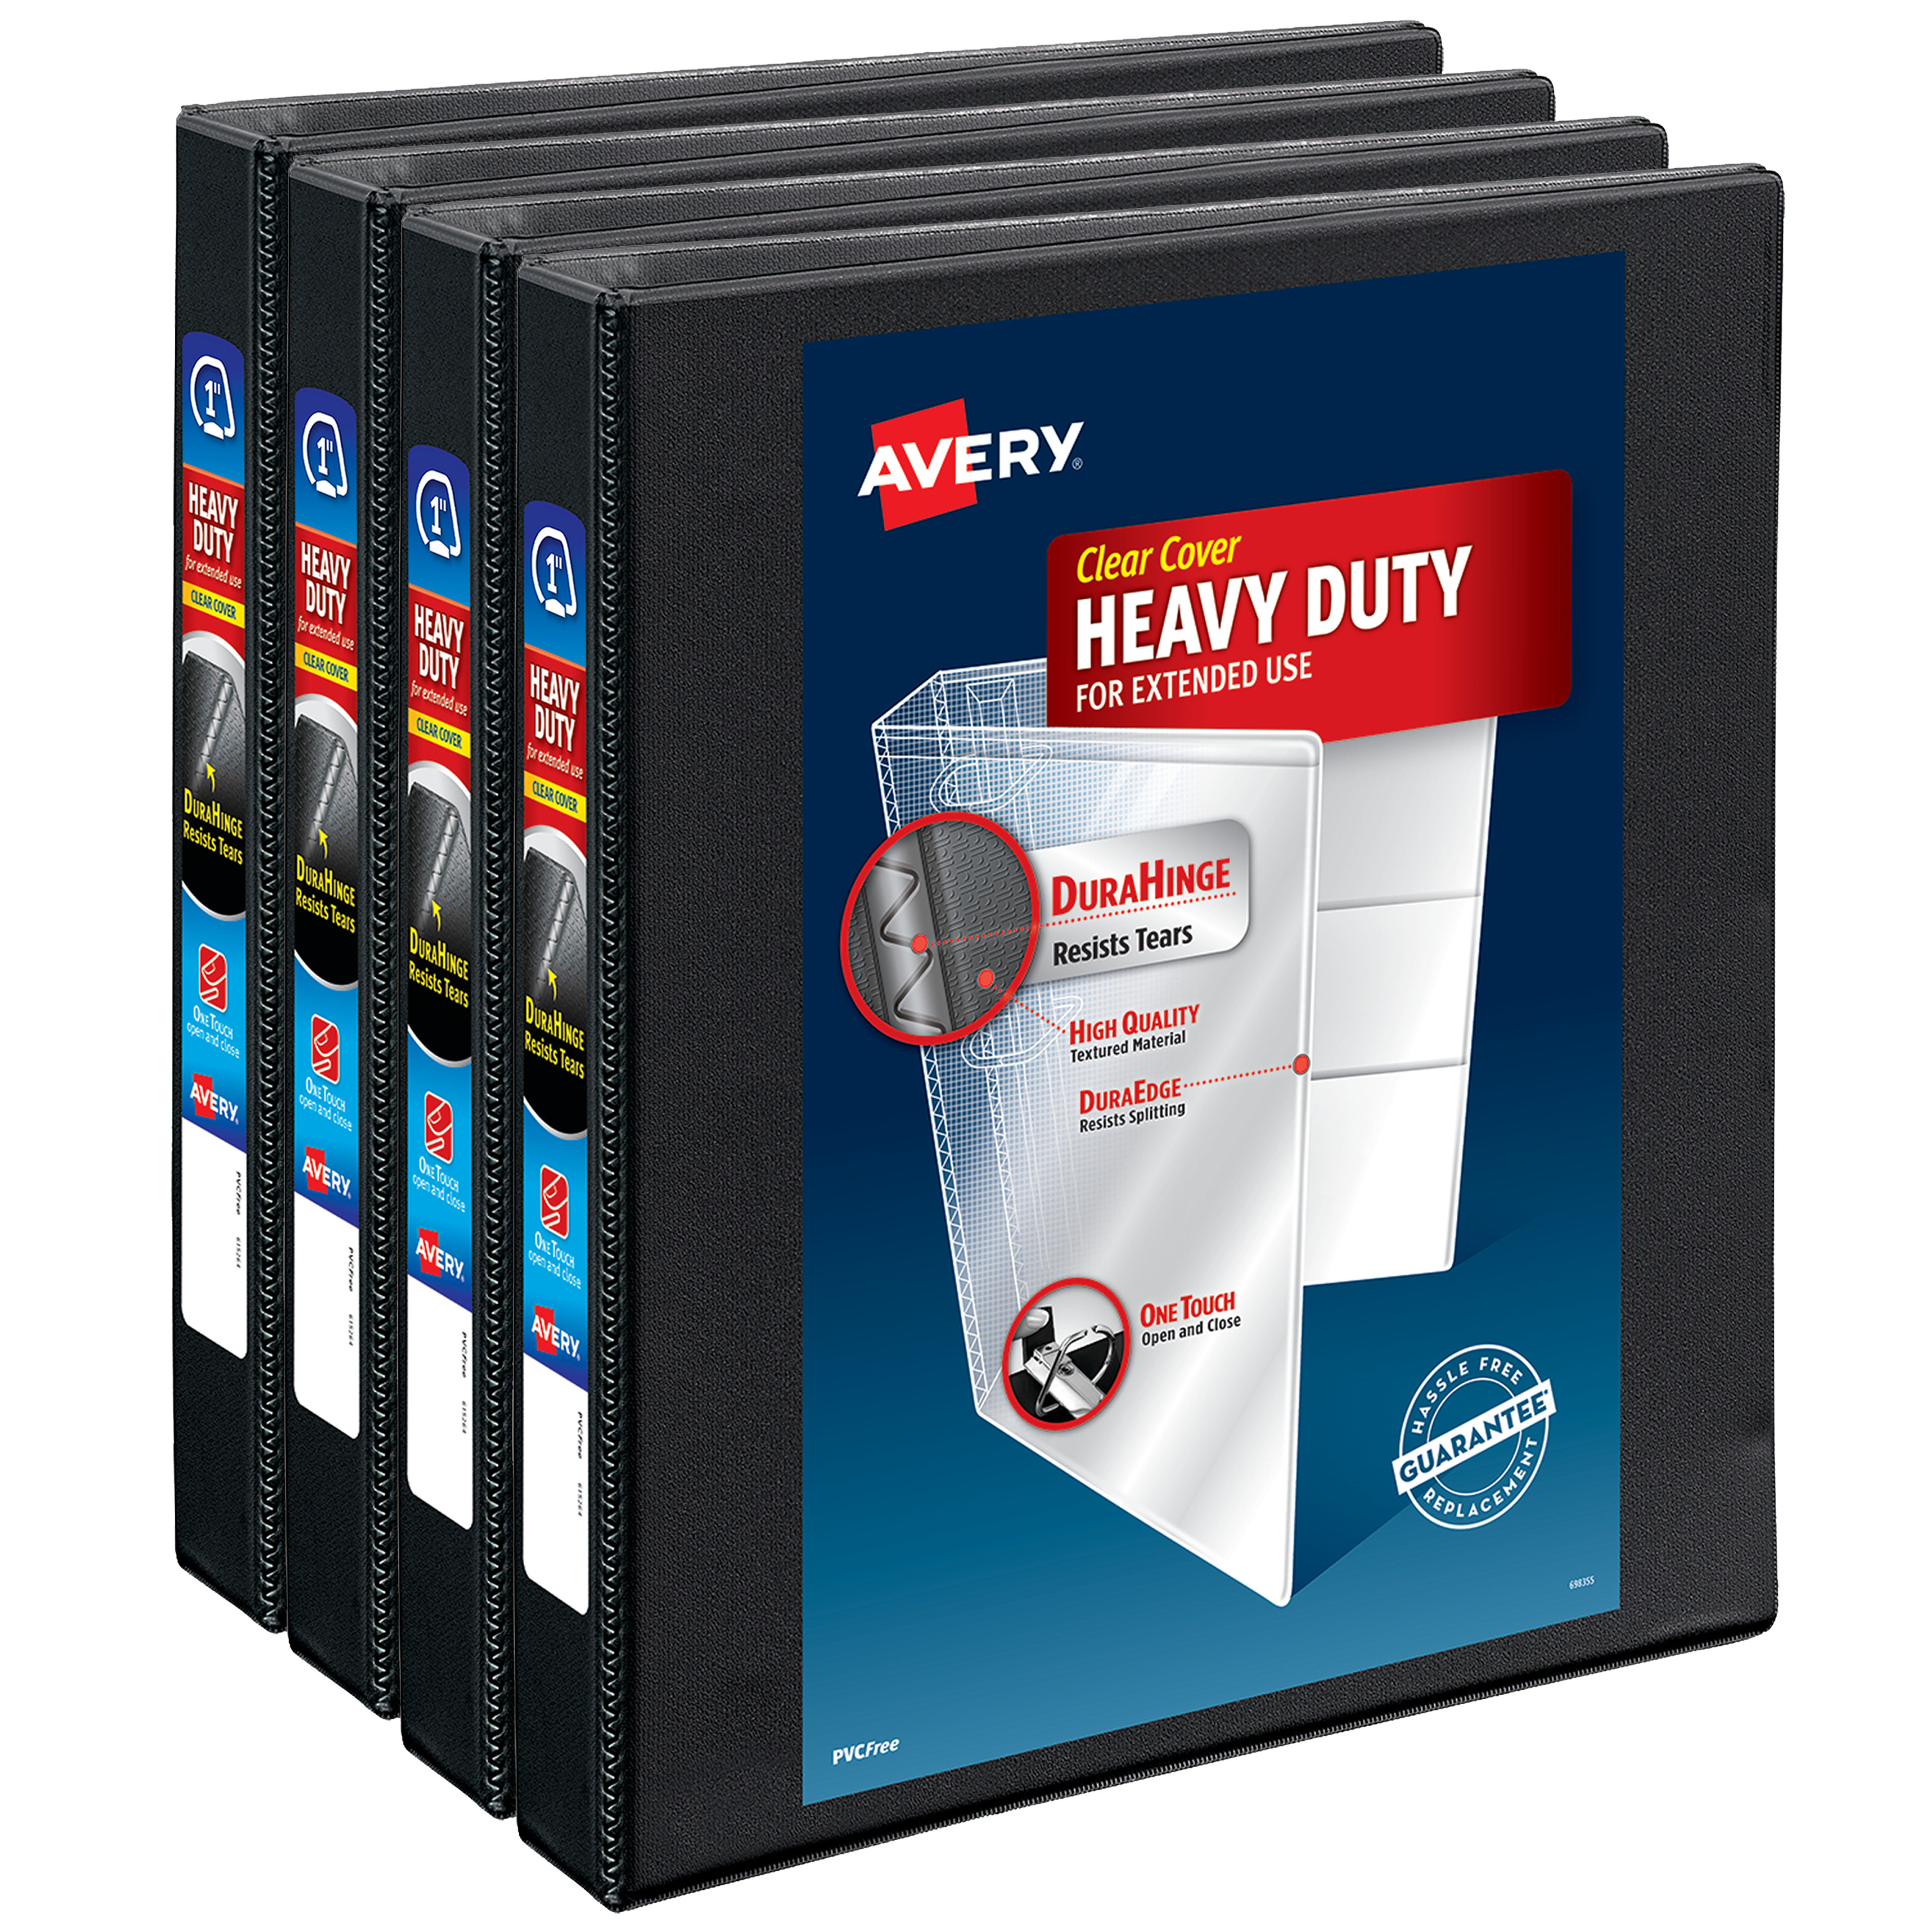 Avery Heavy Duty View 3 Ring Binders, 1" One Touch Slant Rings, Black Binders (17251) (Pack of 4) - image 1 of 9